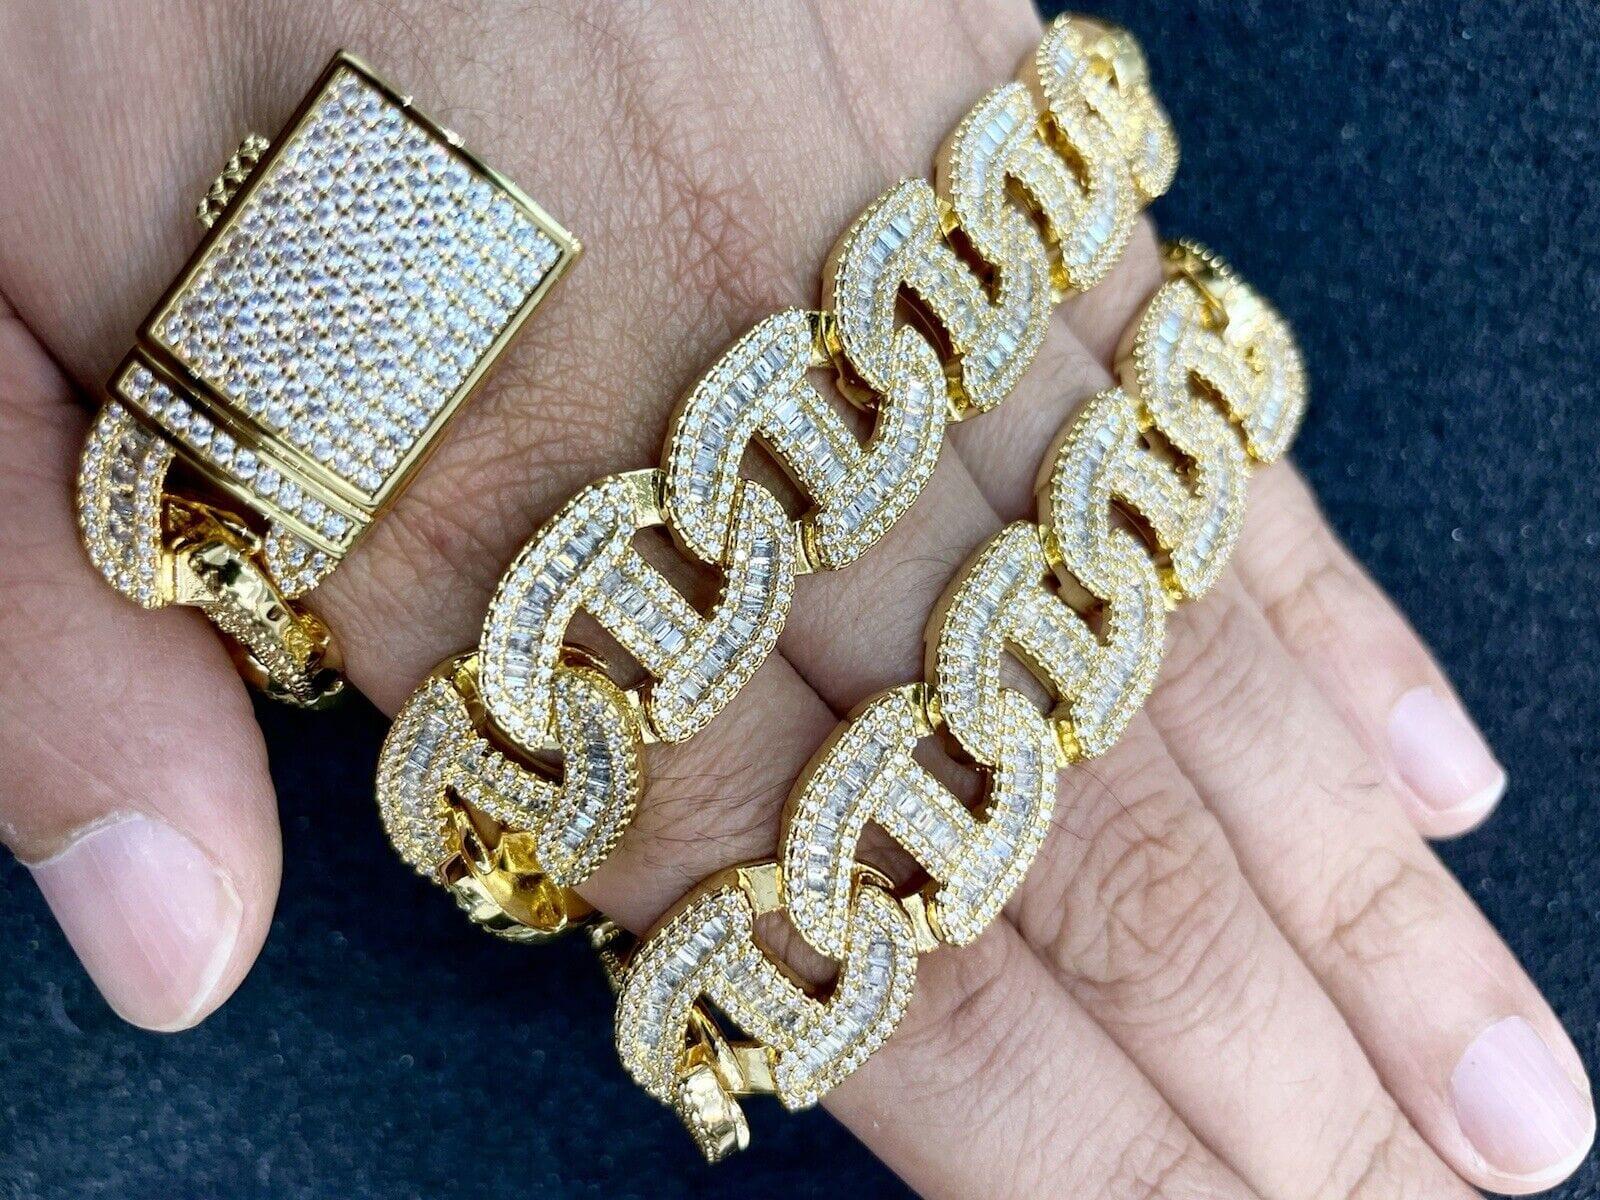 Gold Plated Iced Out Hermes Bracelet – FrostNYC